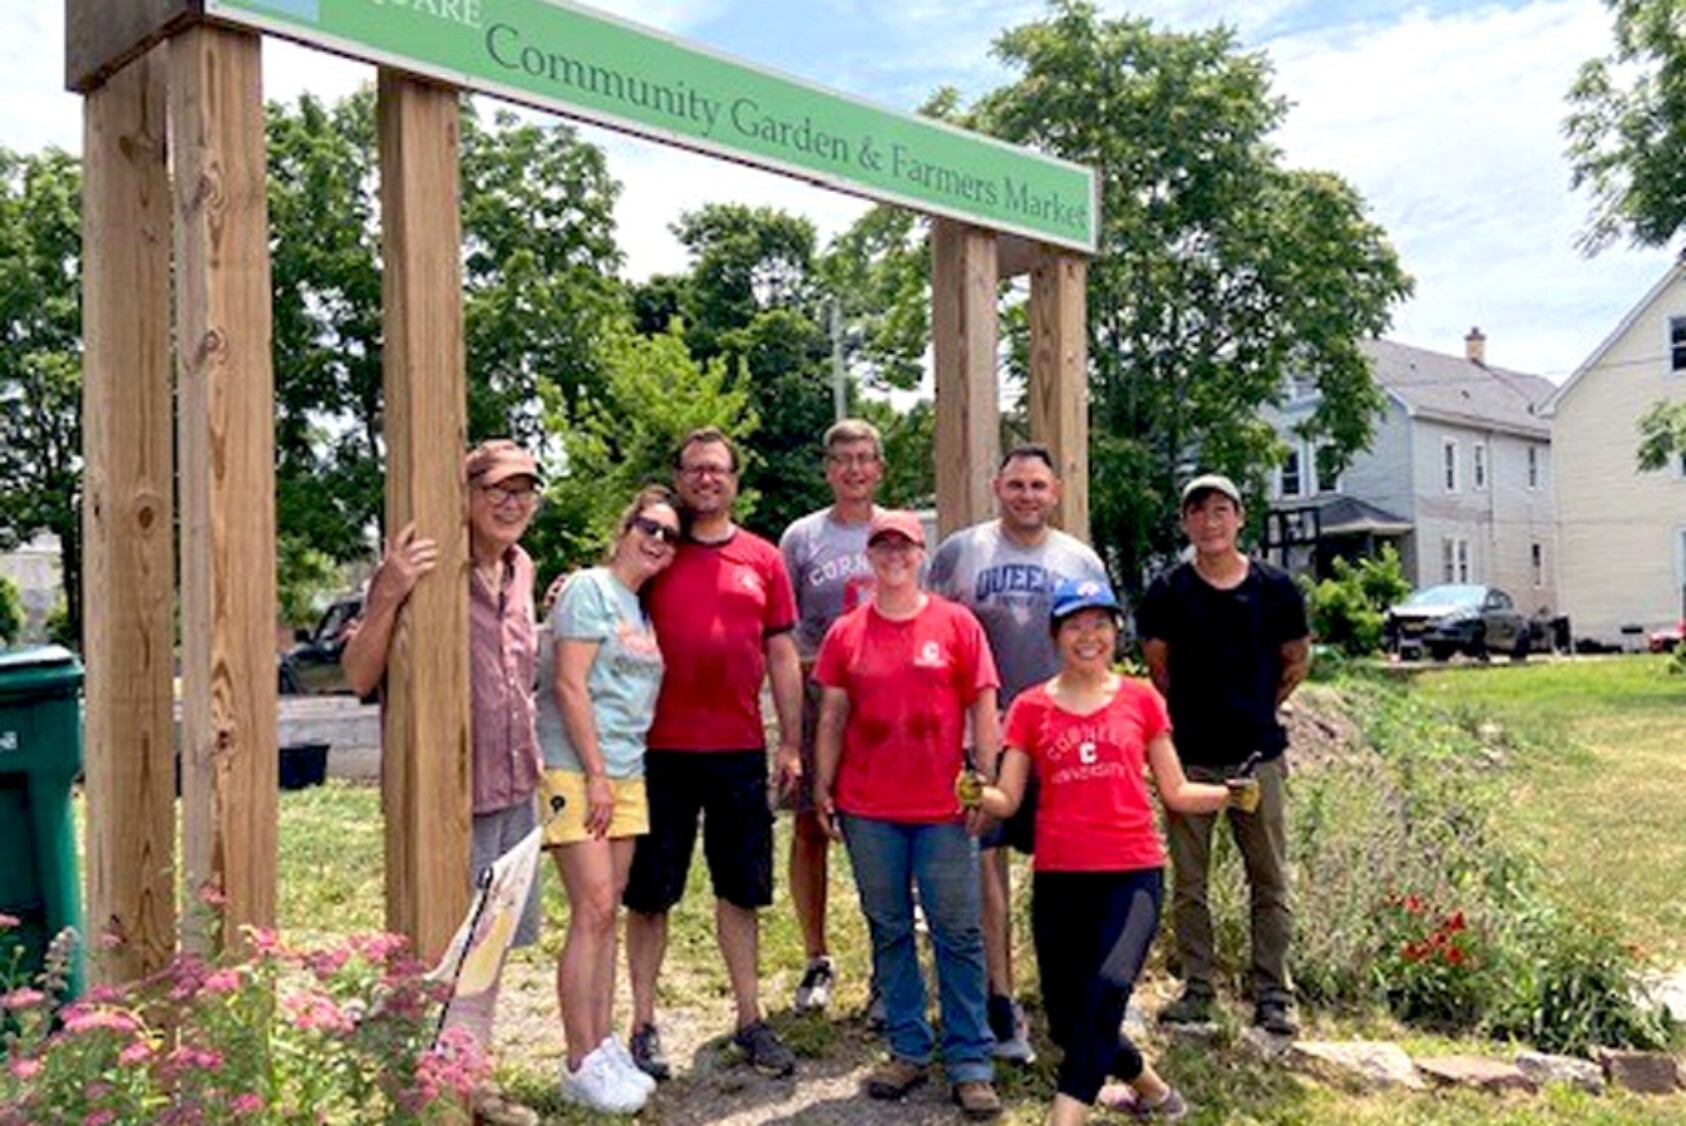 The Cornell Club of Greater Buffalo was one of five regional clubs that volunteered to do landscape, park, or garden cleanups in July as part of Cornell Cares summer edition.